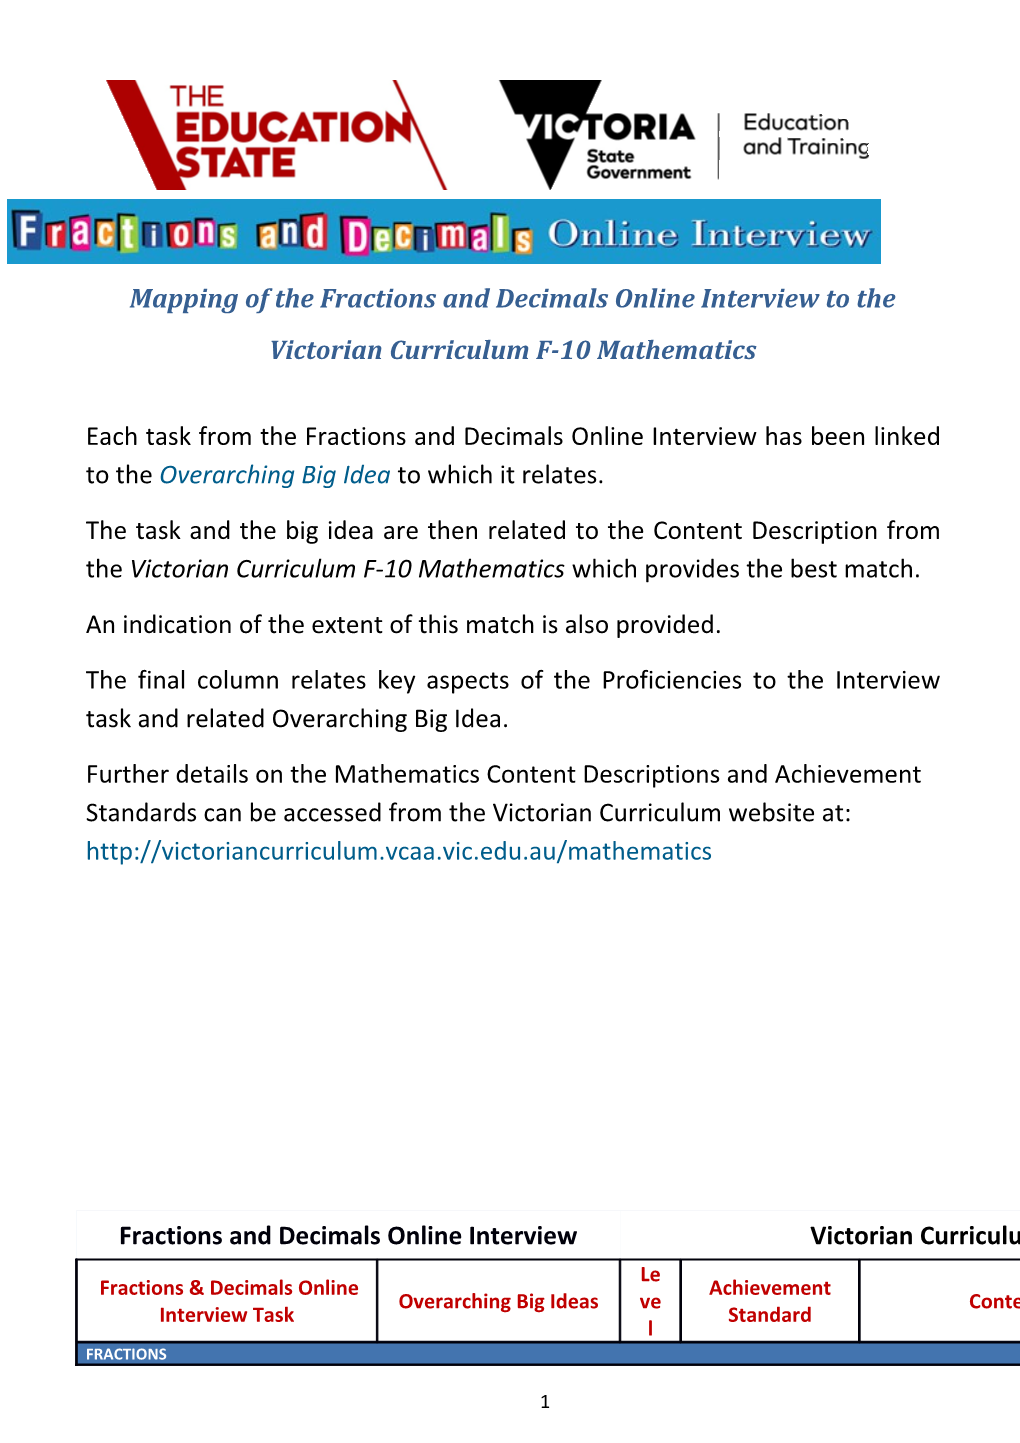 Fractions and Decimals Online Interview Mapping to the Victorian Curriculum - Mathematics